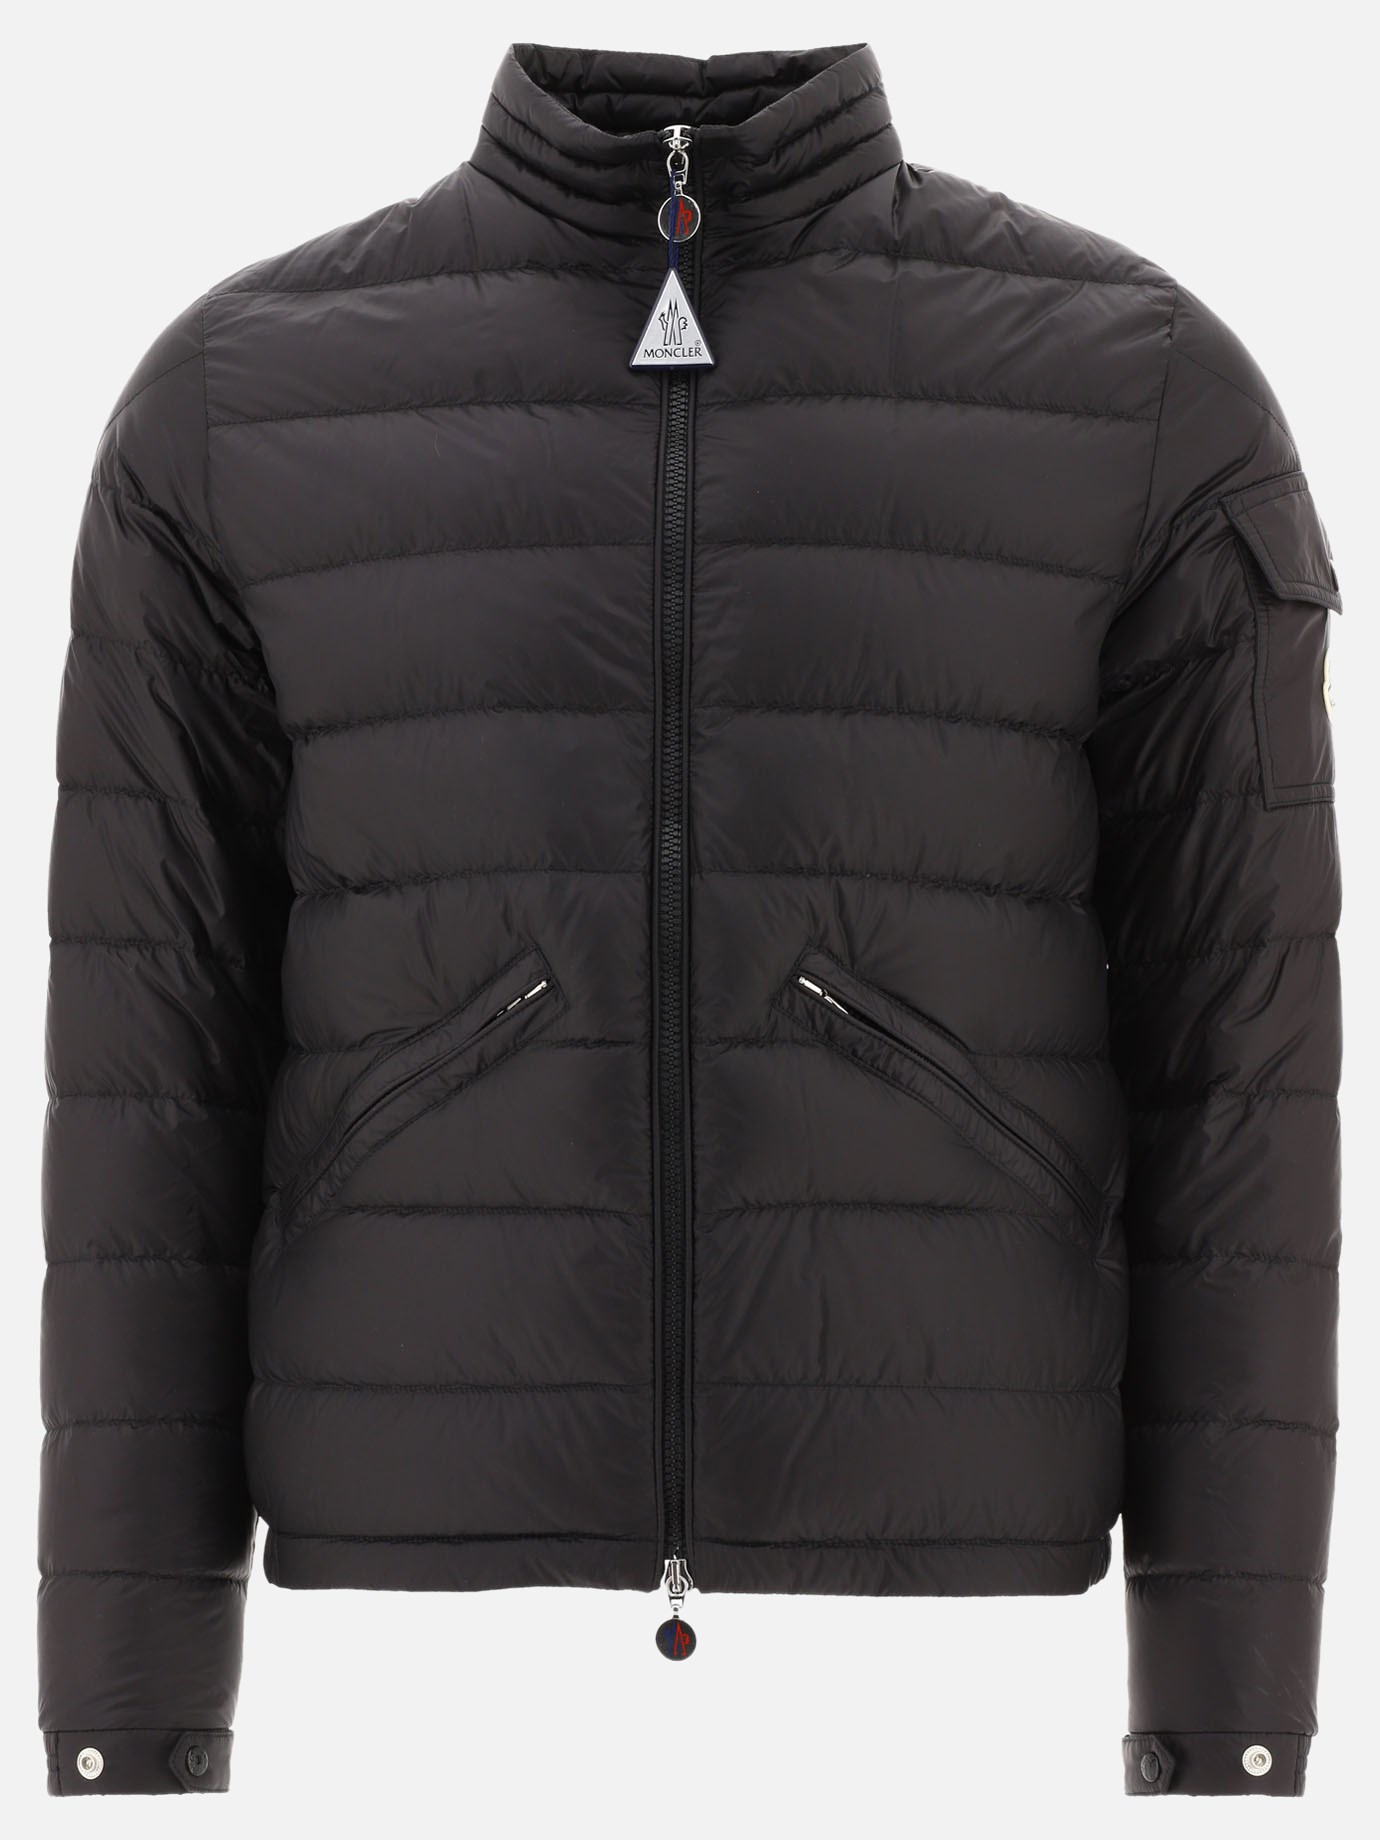  Agay  down jacket by Moncler